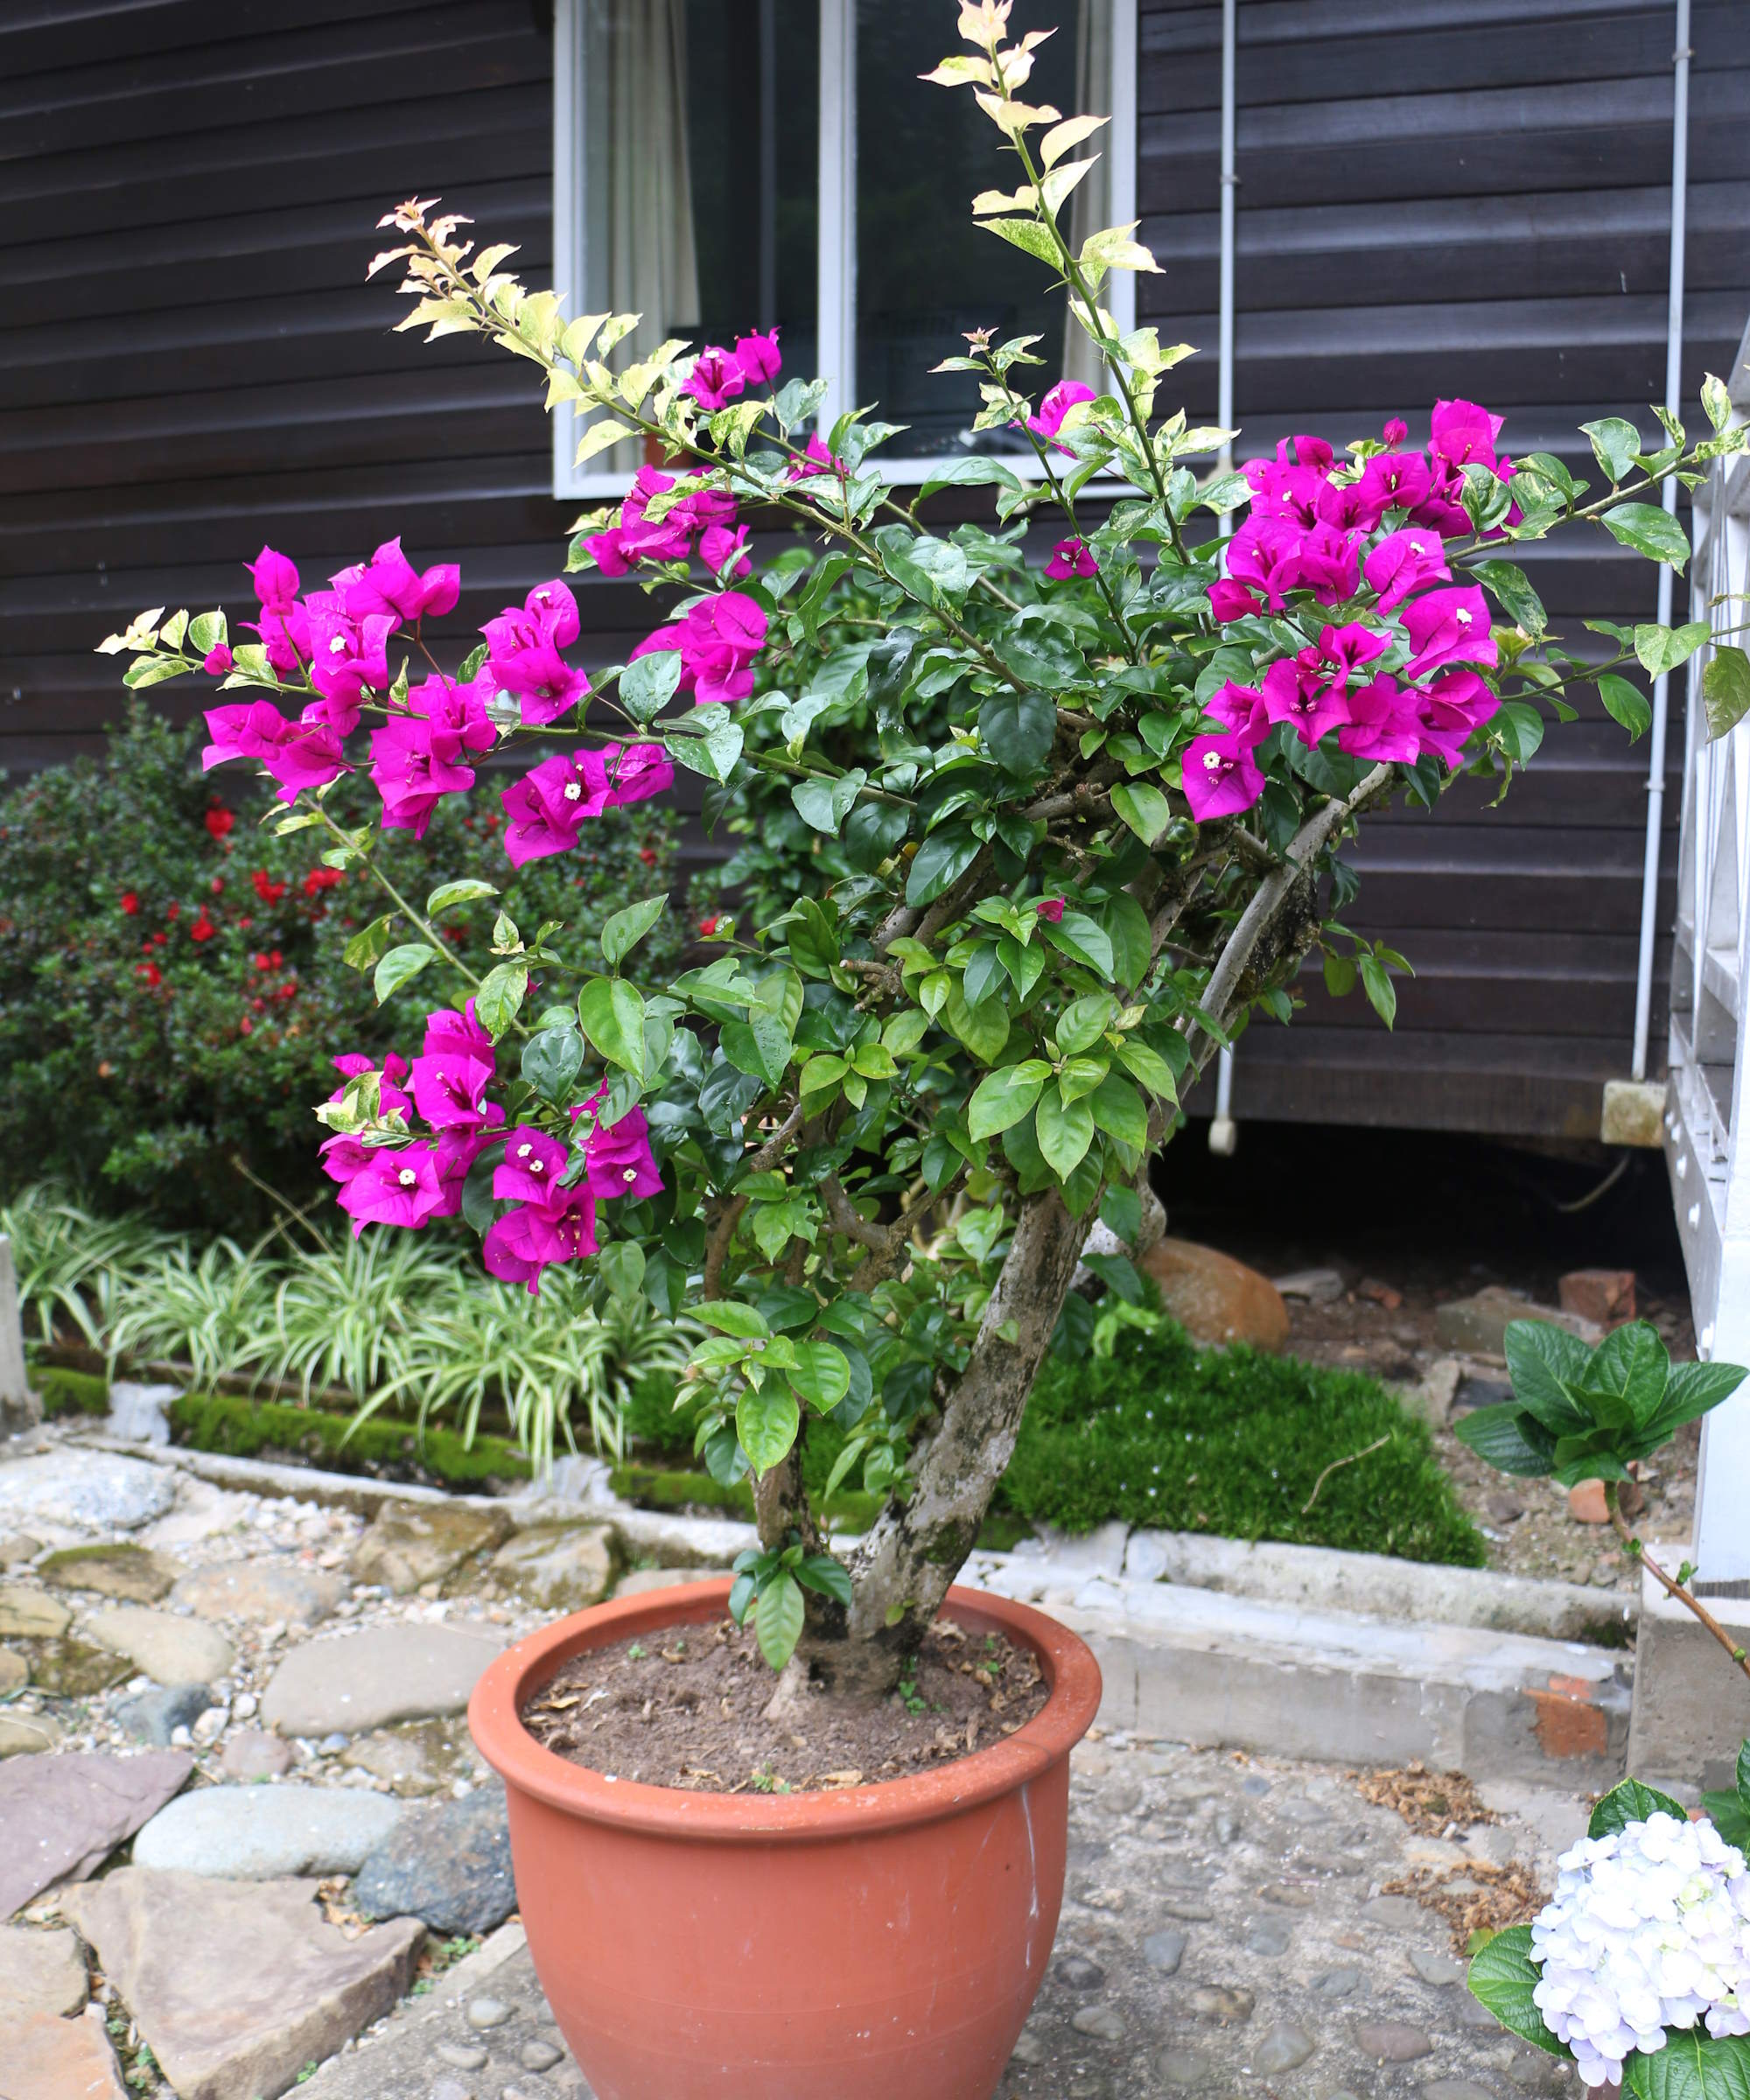 How To Prune Bougainvillea Expert Trimming Tips To